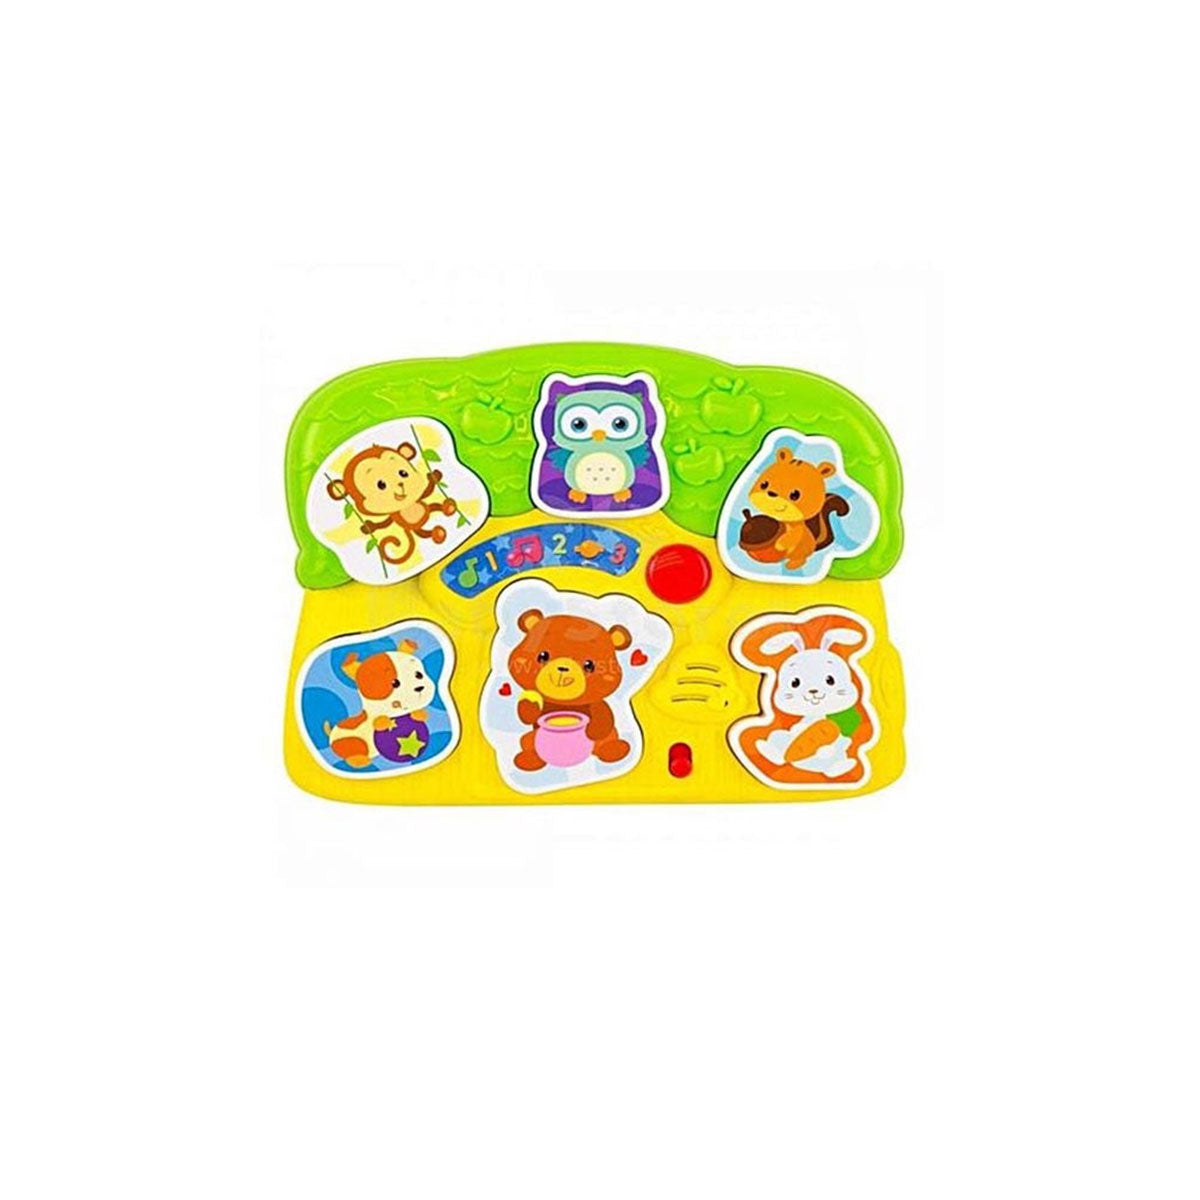 Winfun - Lights 'N Sounds Animal Puzzle